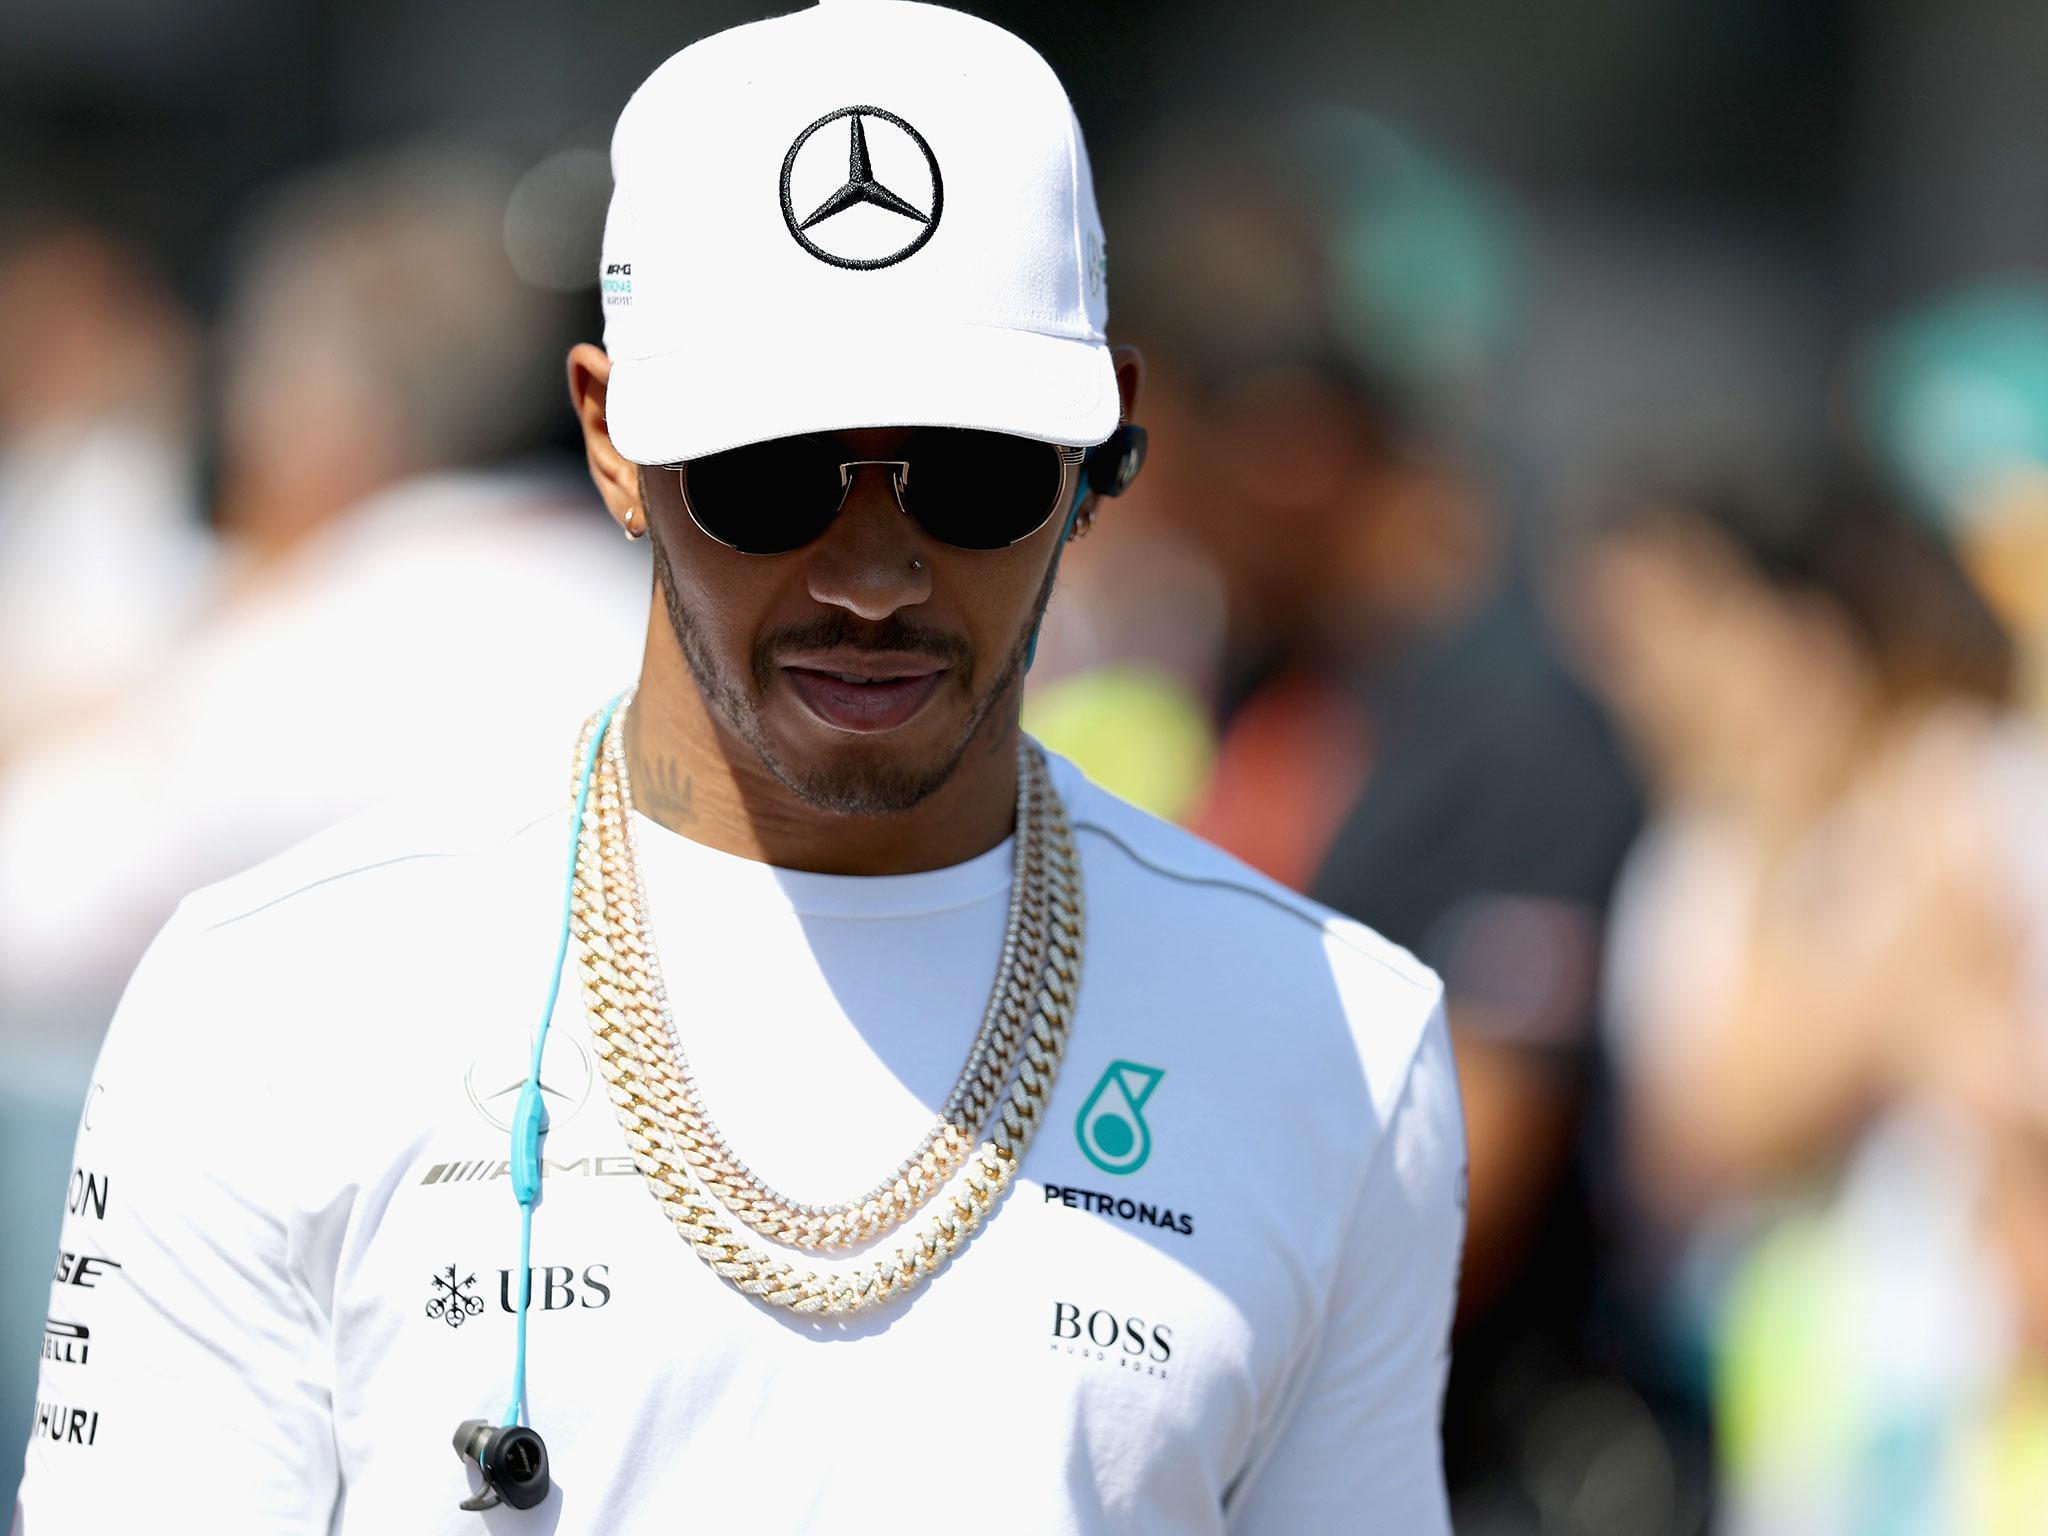 Lewis Hamilton is in no mood to kiss and make up with Sebastian Vettel